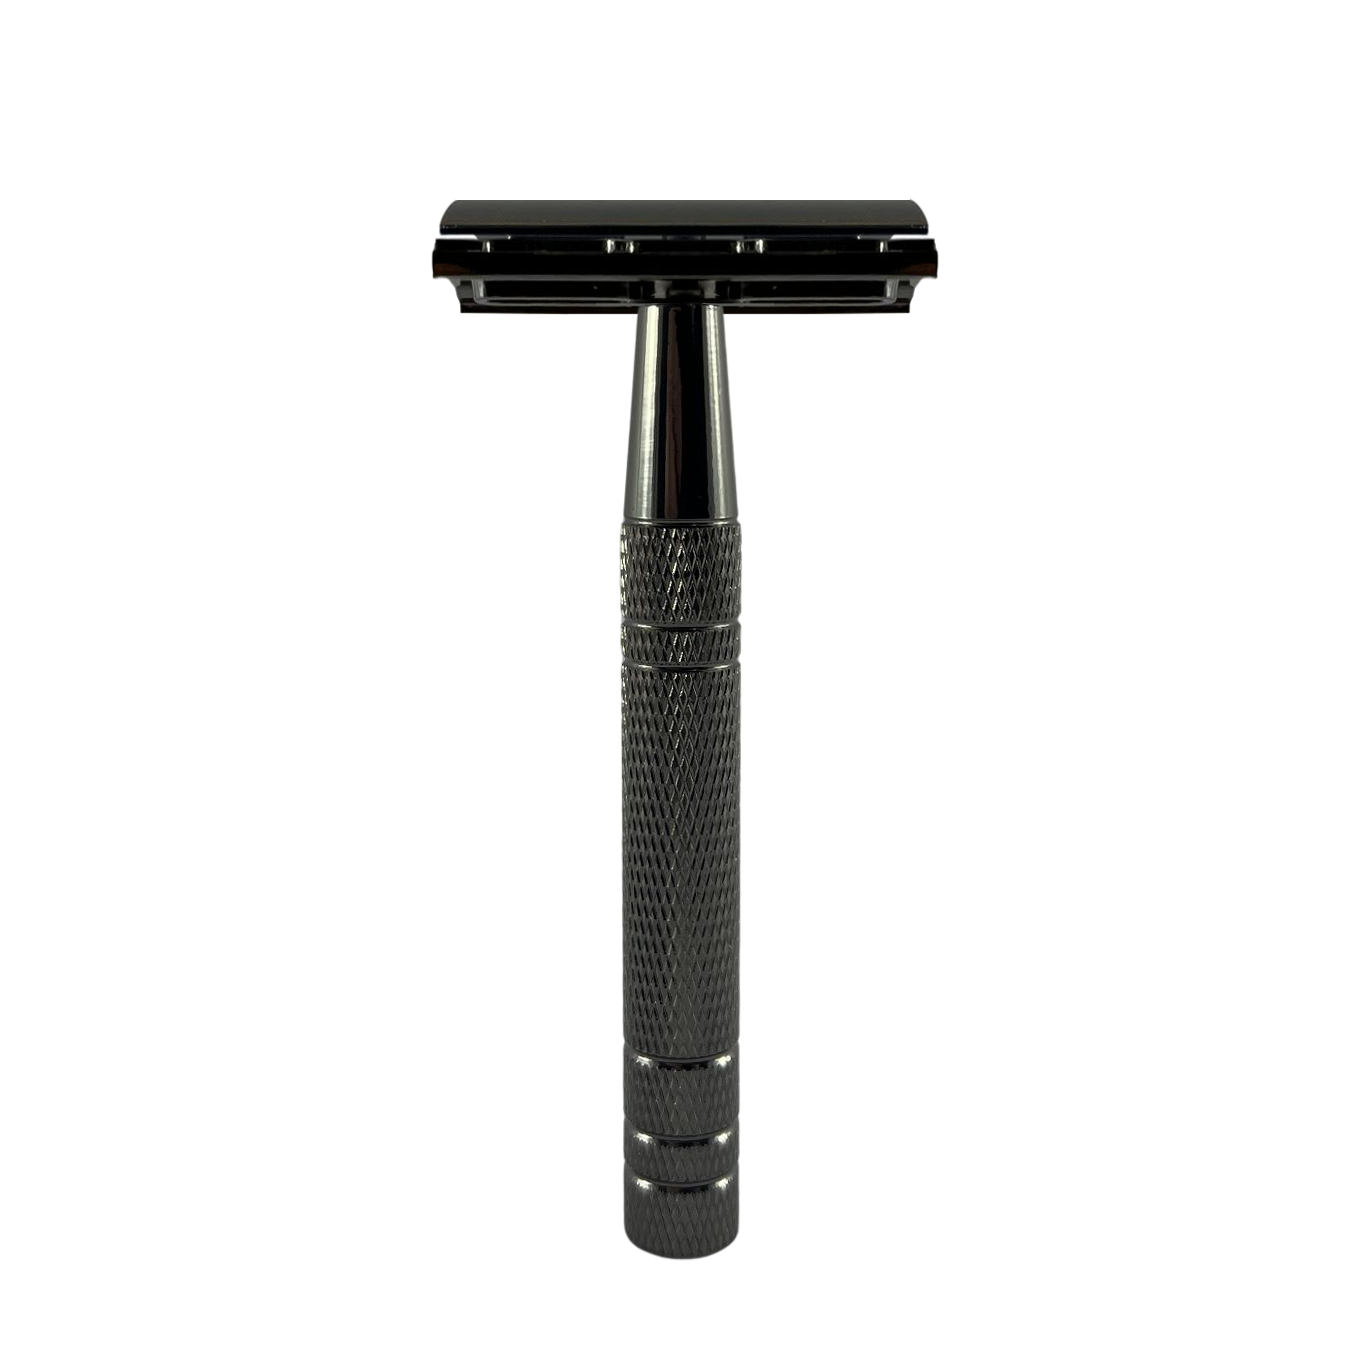 clean shave with safety double edge razor blade